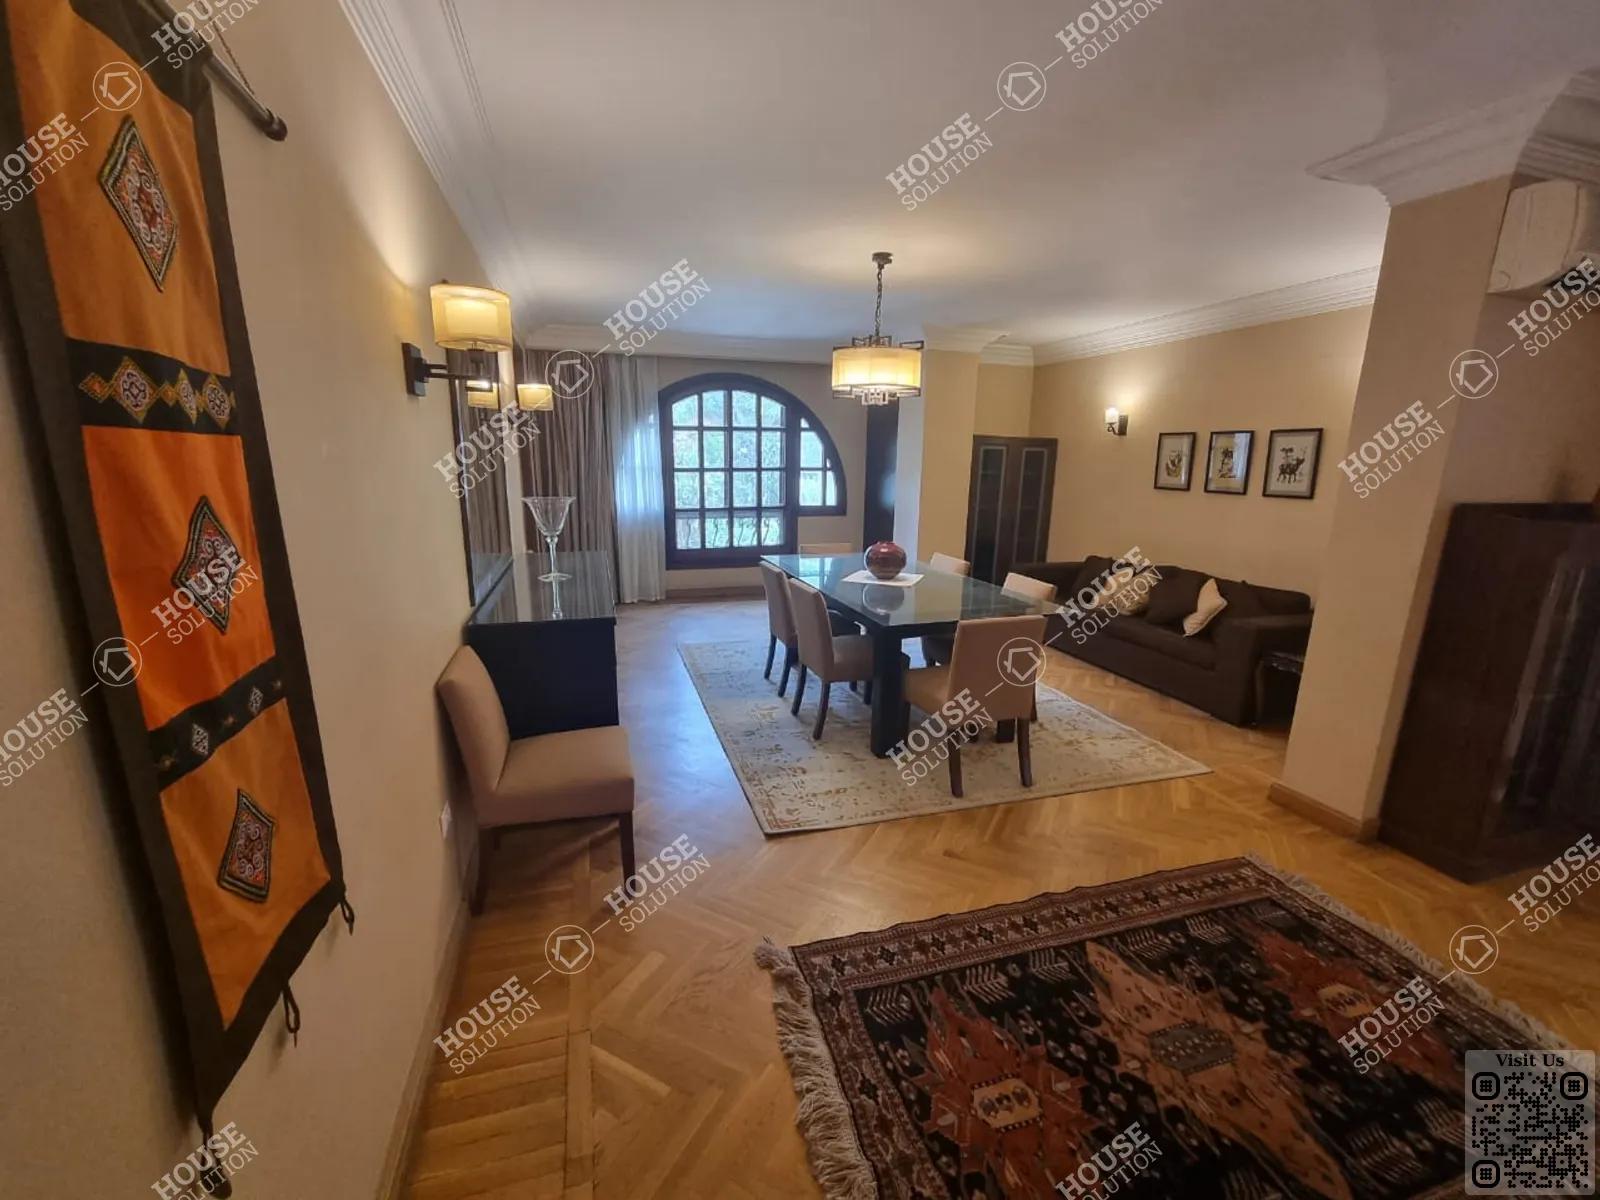 DINING AREA @ Apartments For Rent In Maadi Maadi Sarayat Area: 241 m² consists of 3 Bedrooms 3 Bathrooms Modern furnished 5 stars #5411-2